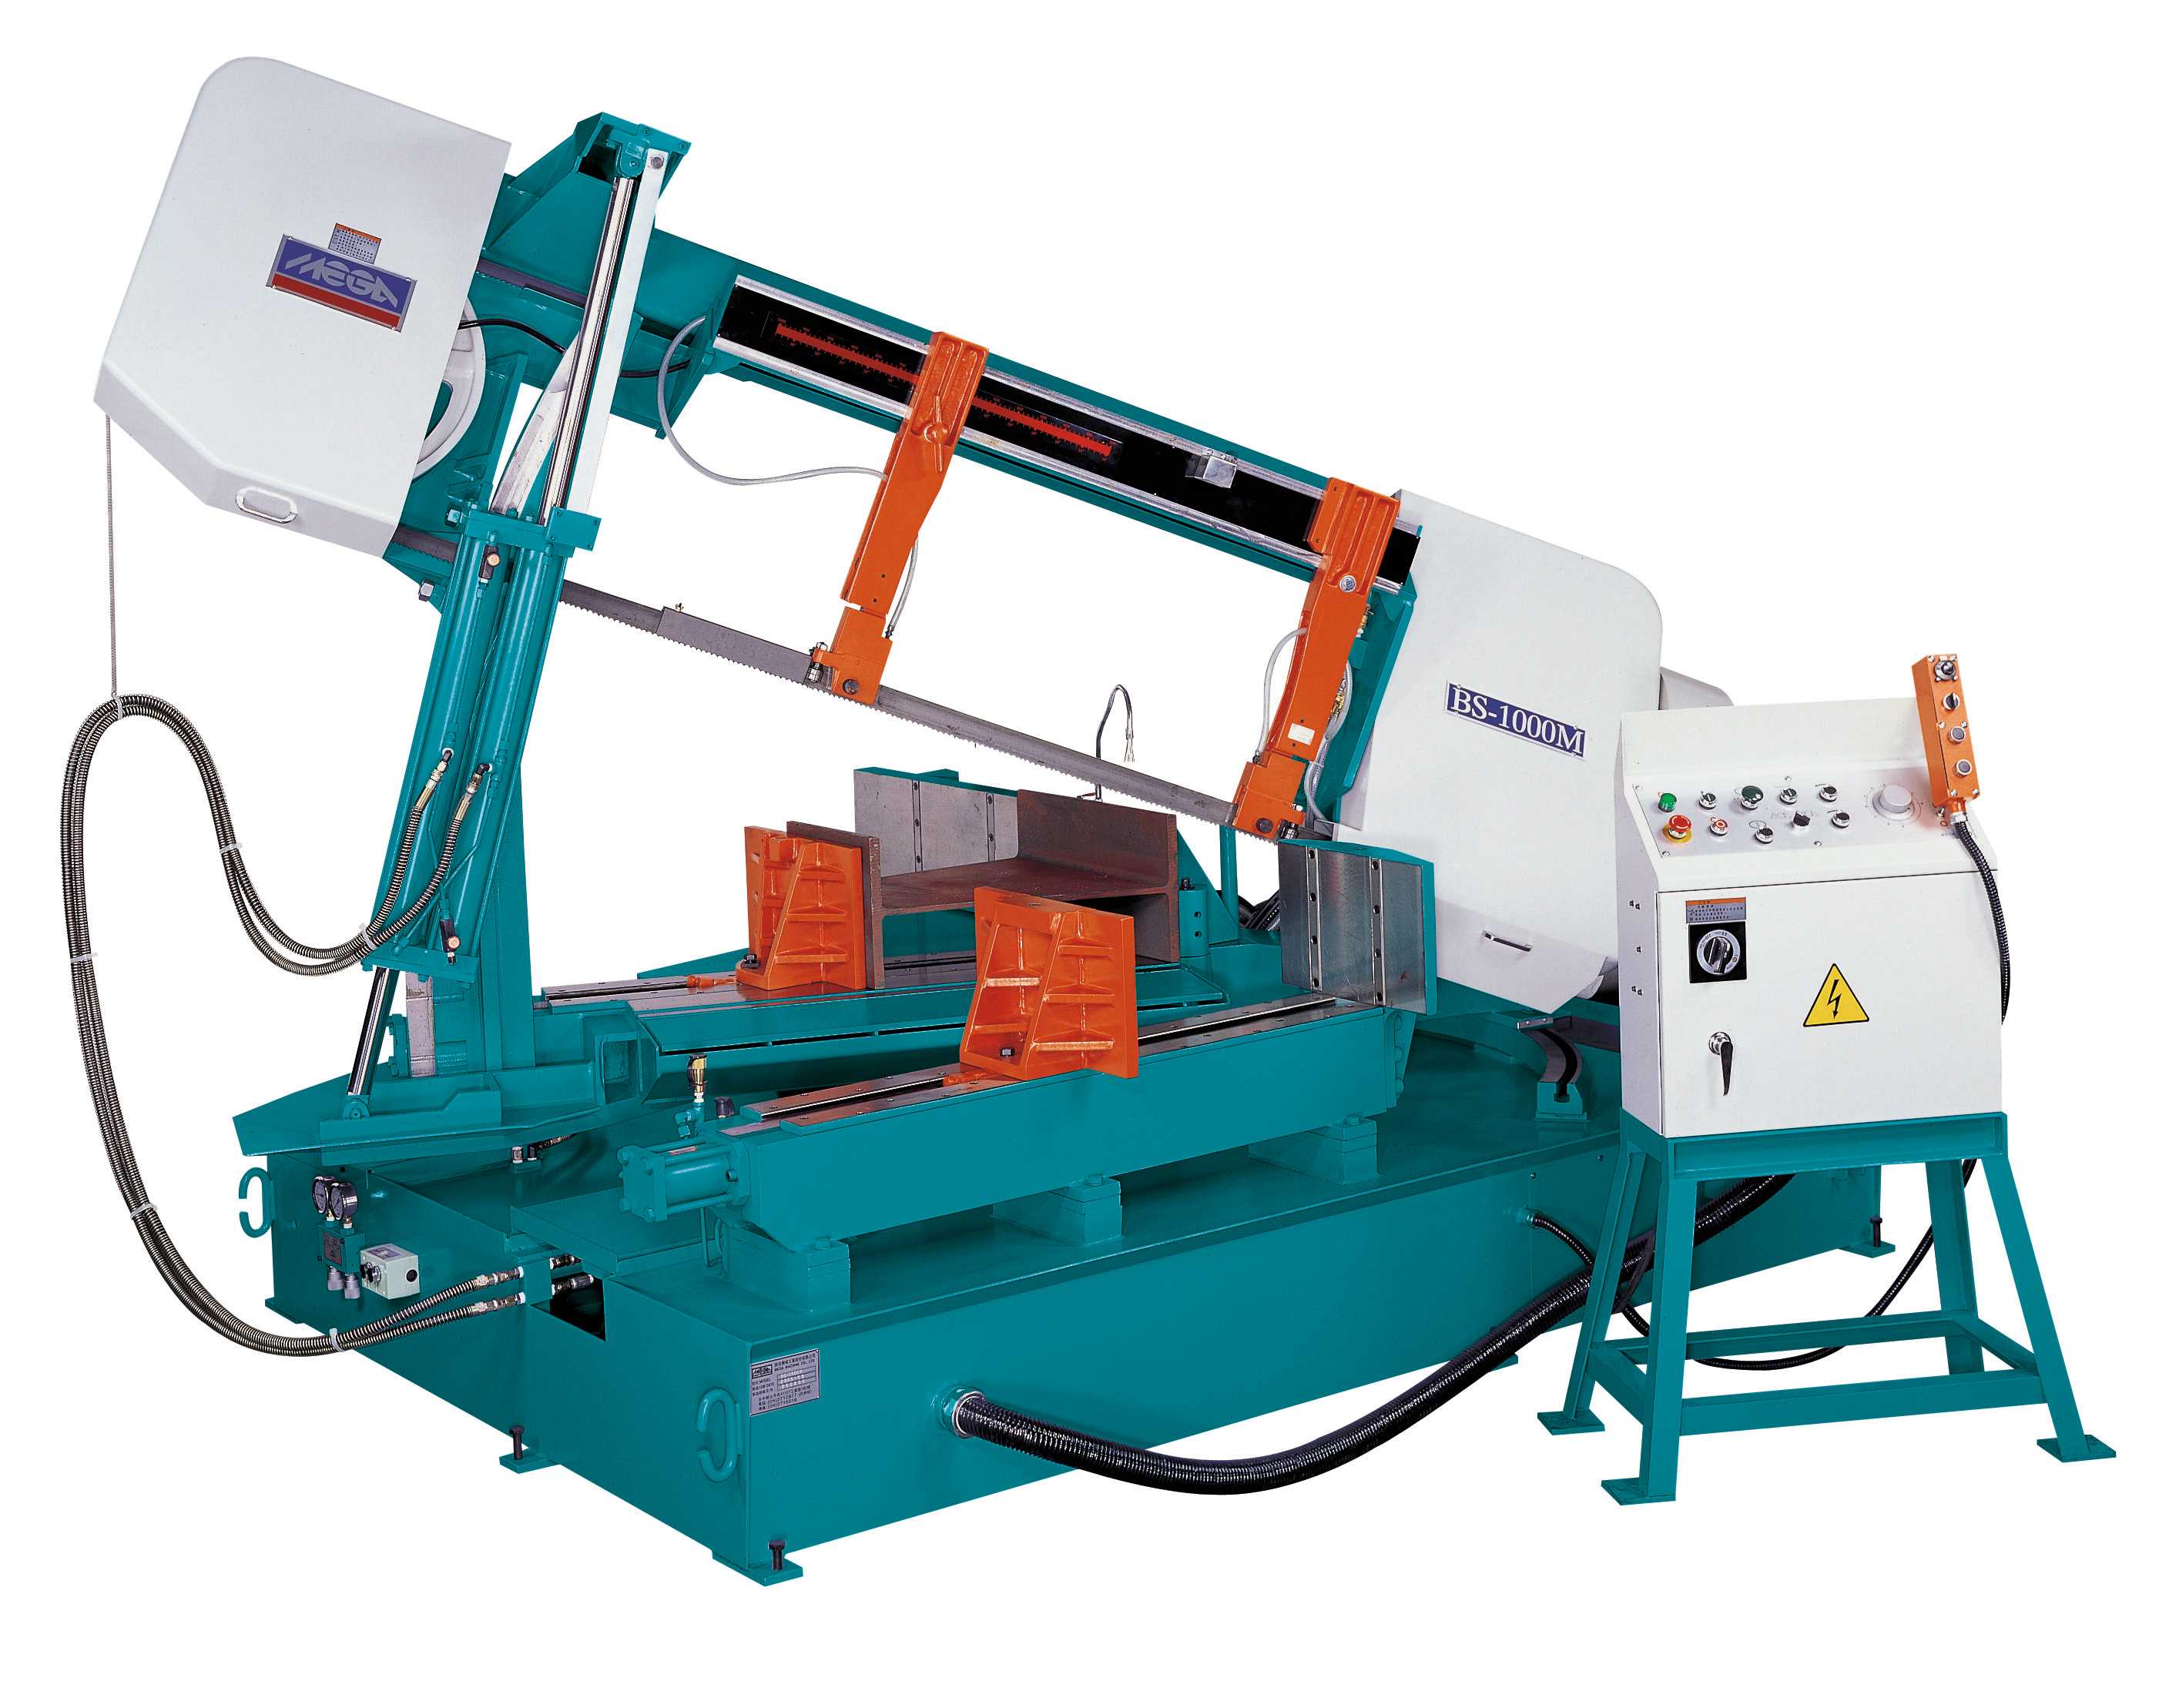 SEMI AUTOMATIC HORIZONTAL BANDSAWS (POWER TURNING TABLE MITRE CUTTING)